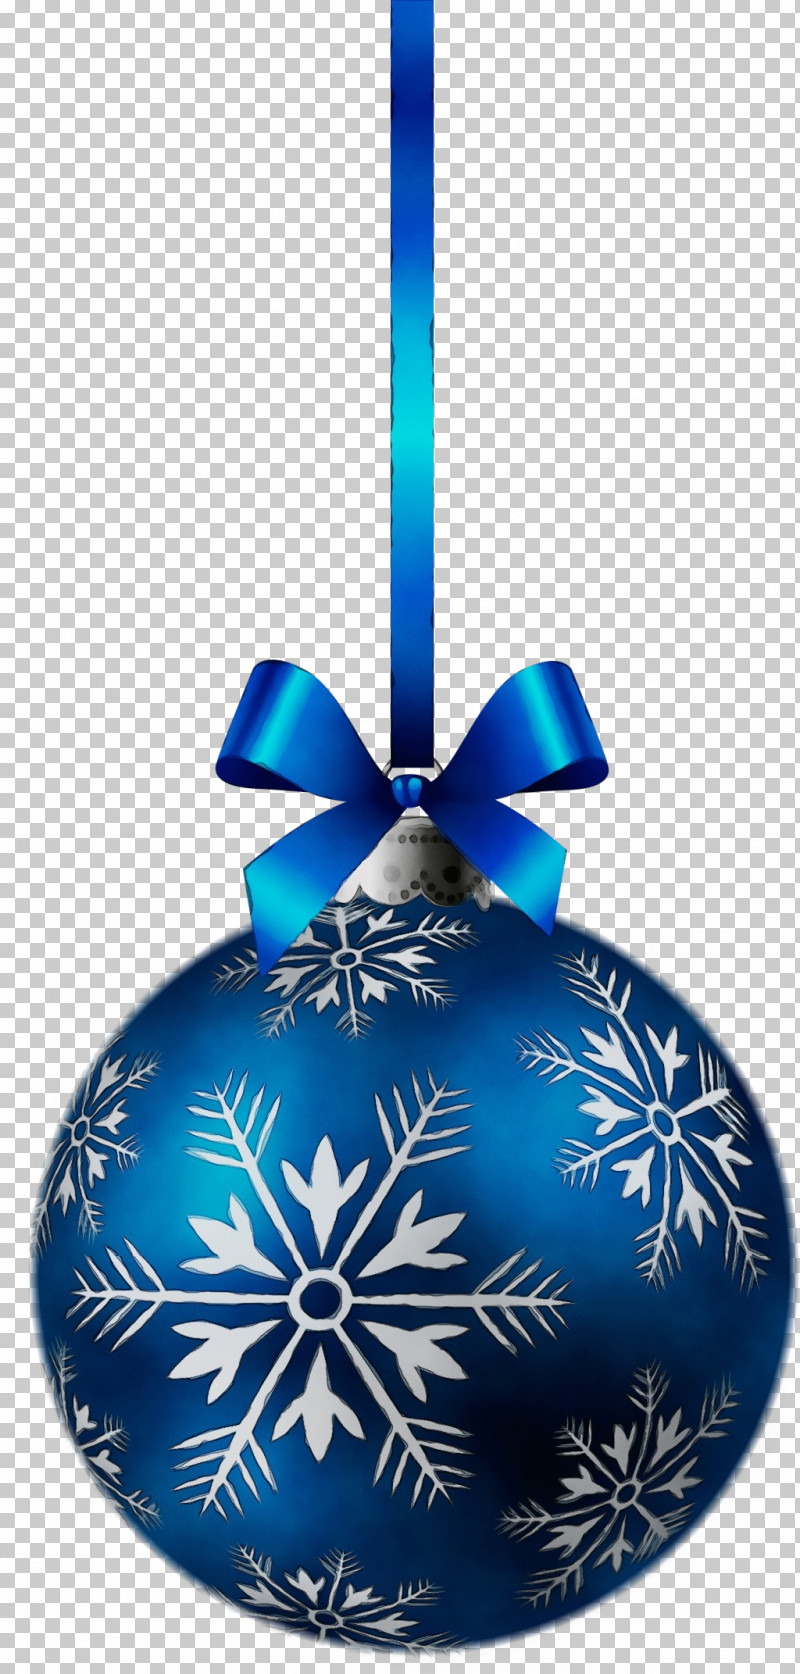 Christmas Ornament PNG, Clipart, Blue, Christmas, Christmas Decoration, Christmas Ornament, Cobalt Blue Free PNG Download